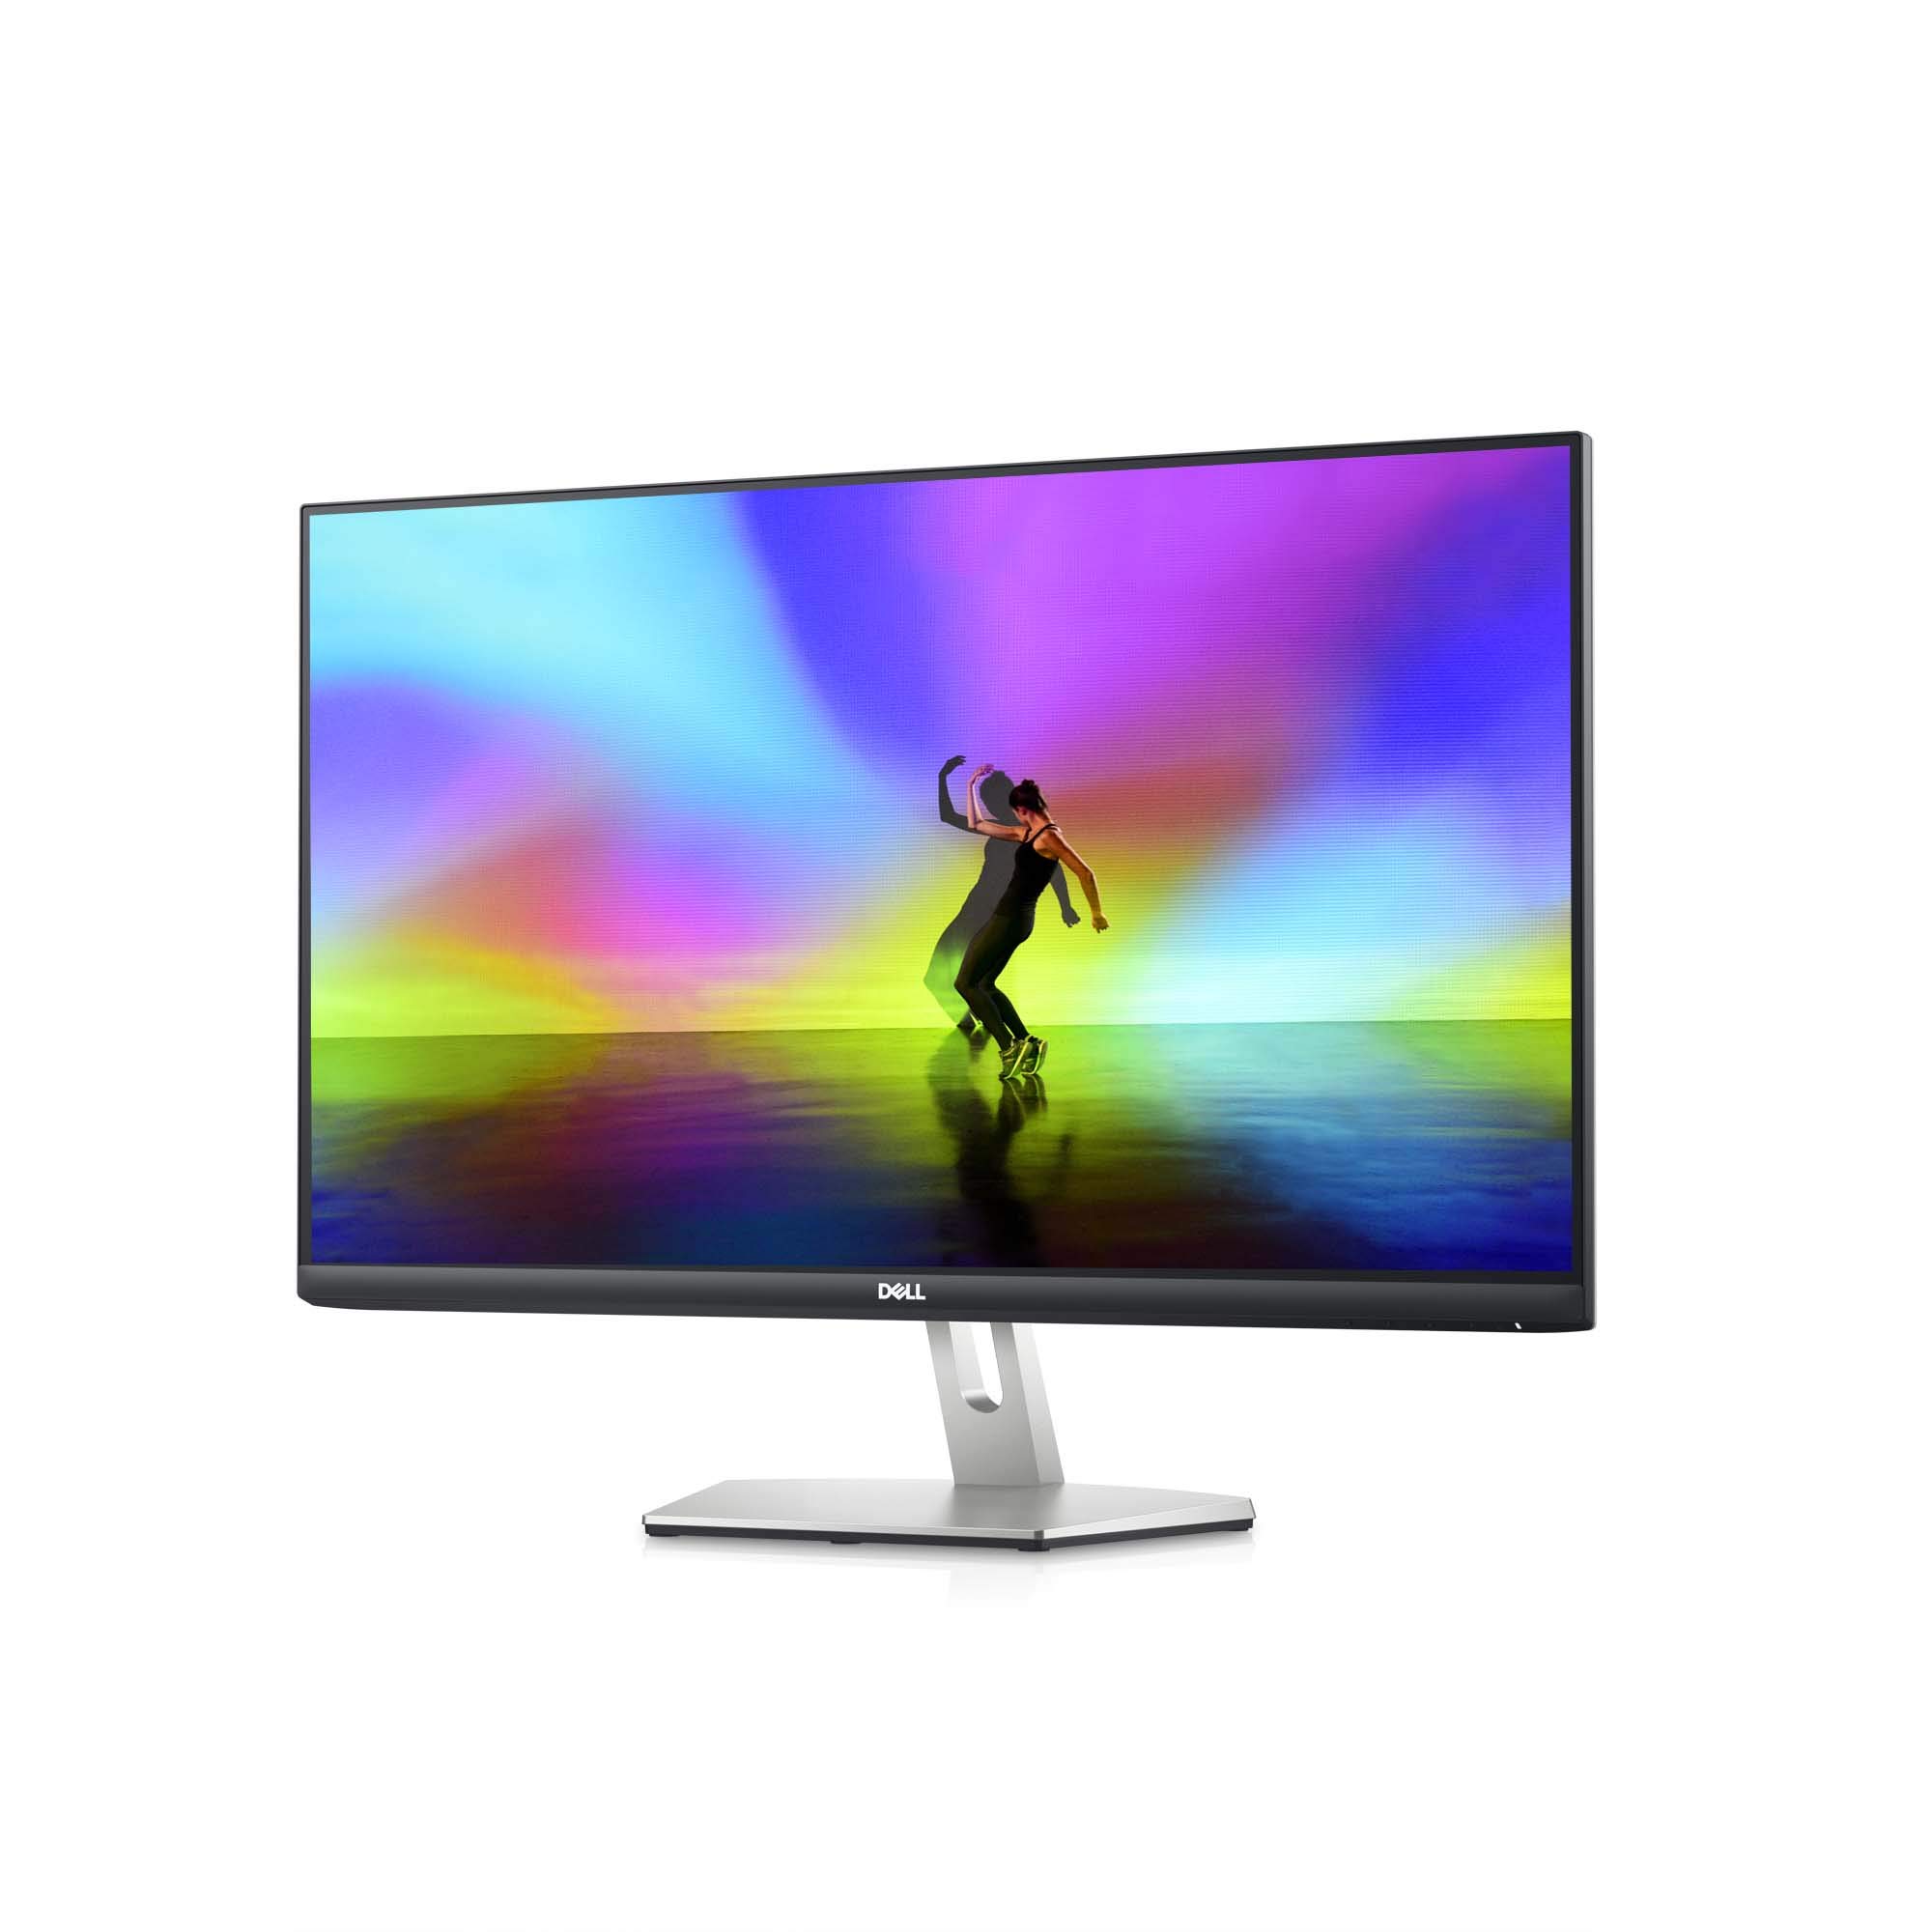 Dell S2721HS Full HD 1920 x 1080p, 75Hz IPS LED LCD Thin Bezel Adjustable Gaming Monitor, 4ms Grey-to-Grey Response Time, 16.7 Million Colors, HDMI ports, AMD FreeSync, Platinum Silver, 27.0